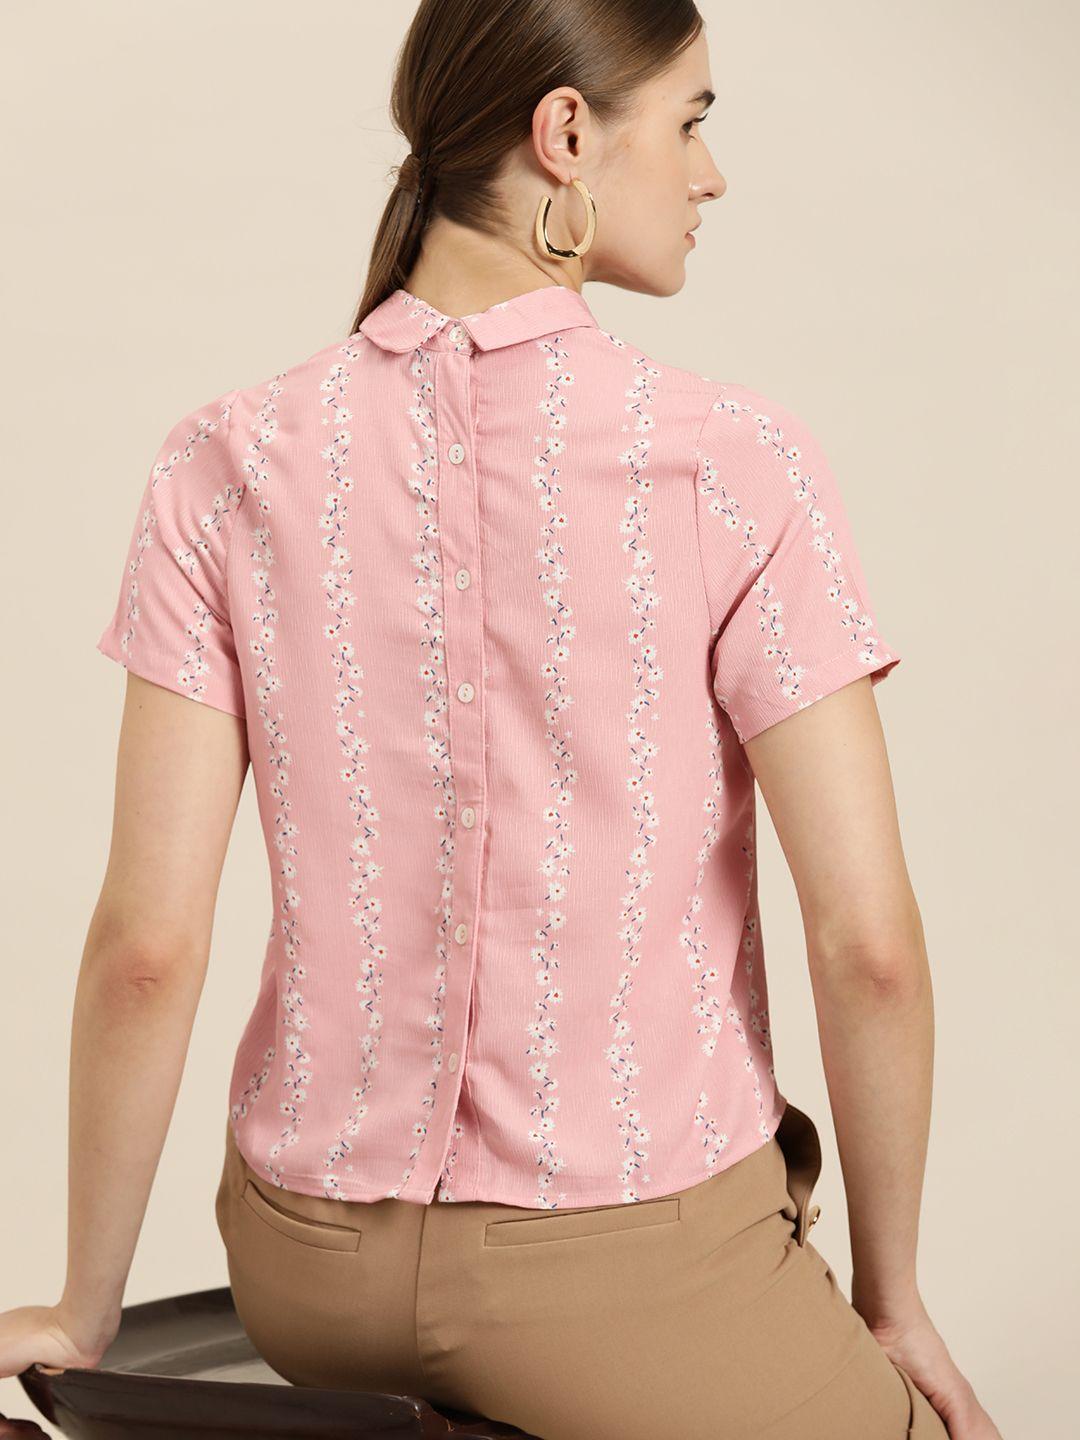 her by invictus floral print shirt style top